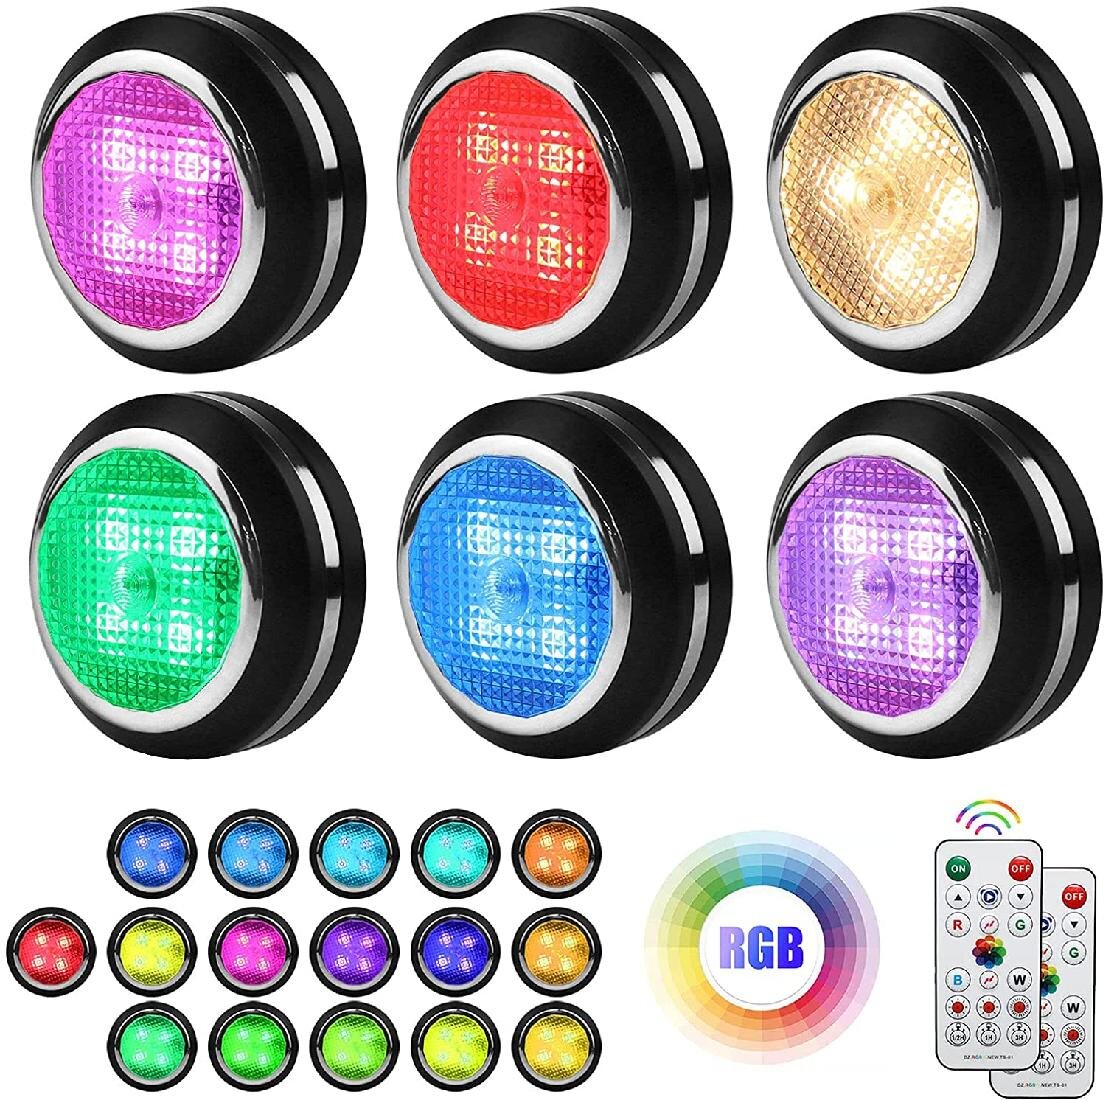 RGB 12 Colors Wireless LED Puck Lights Closet Under Cabinet Lighting w/ Remote 